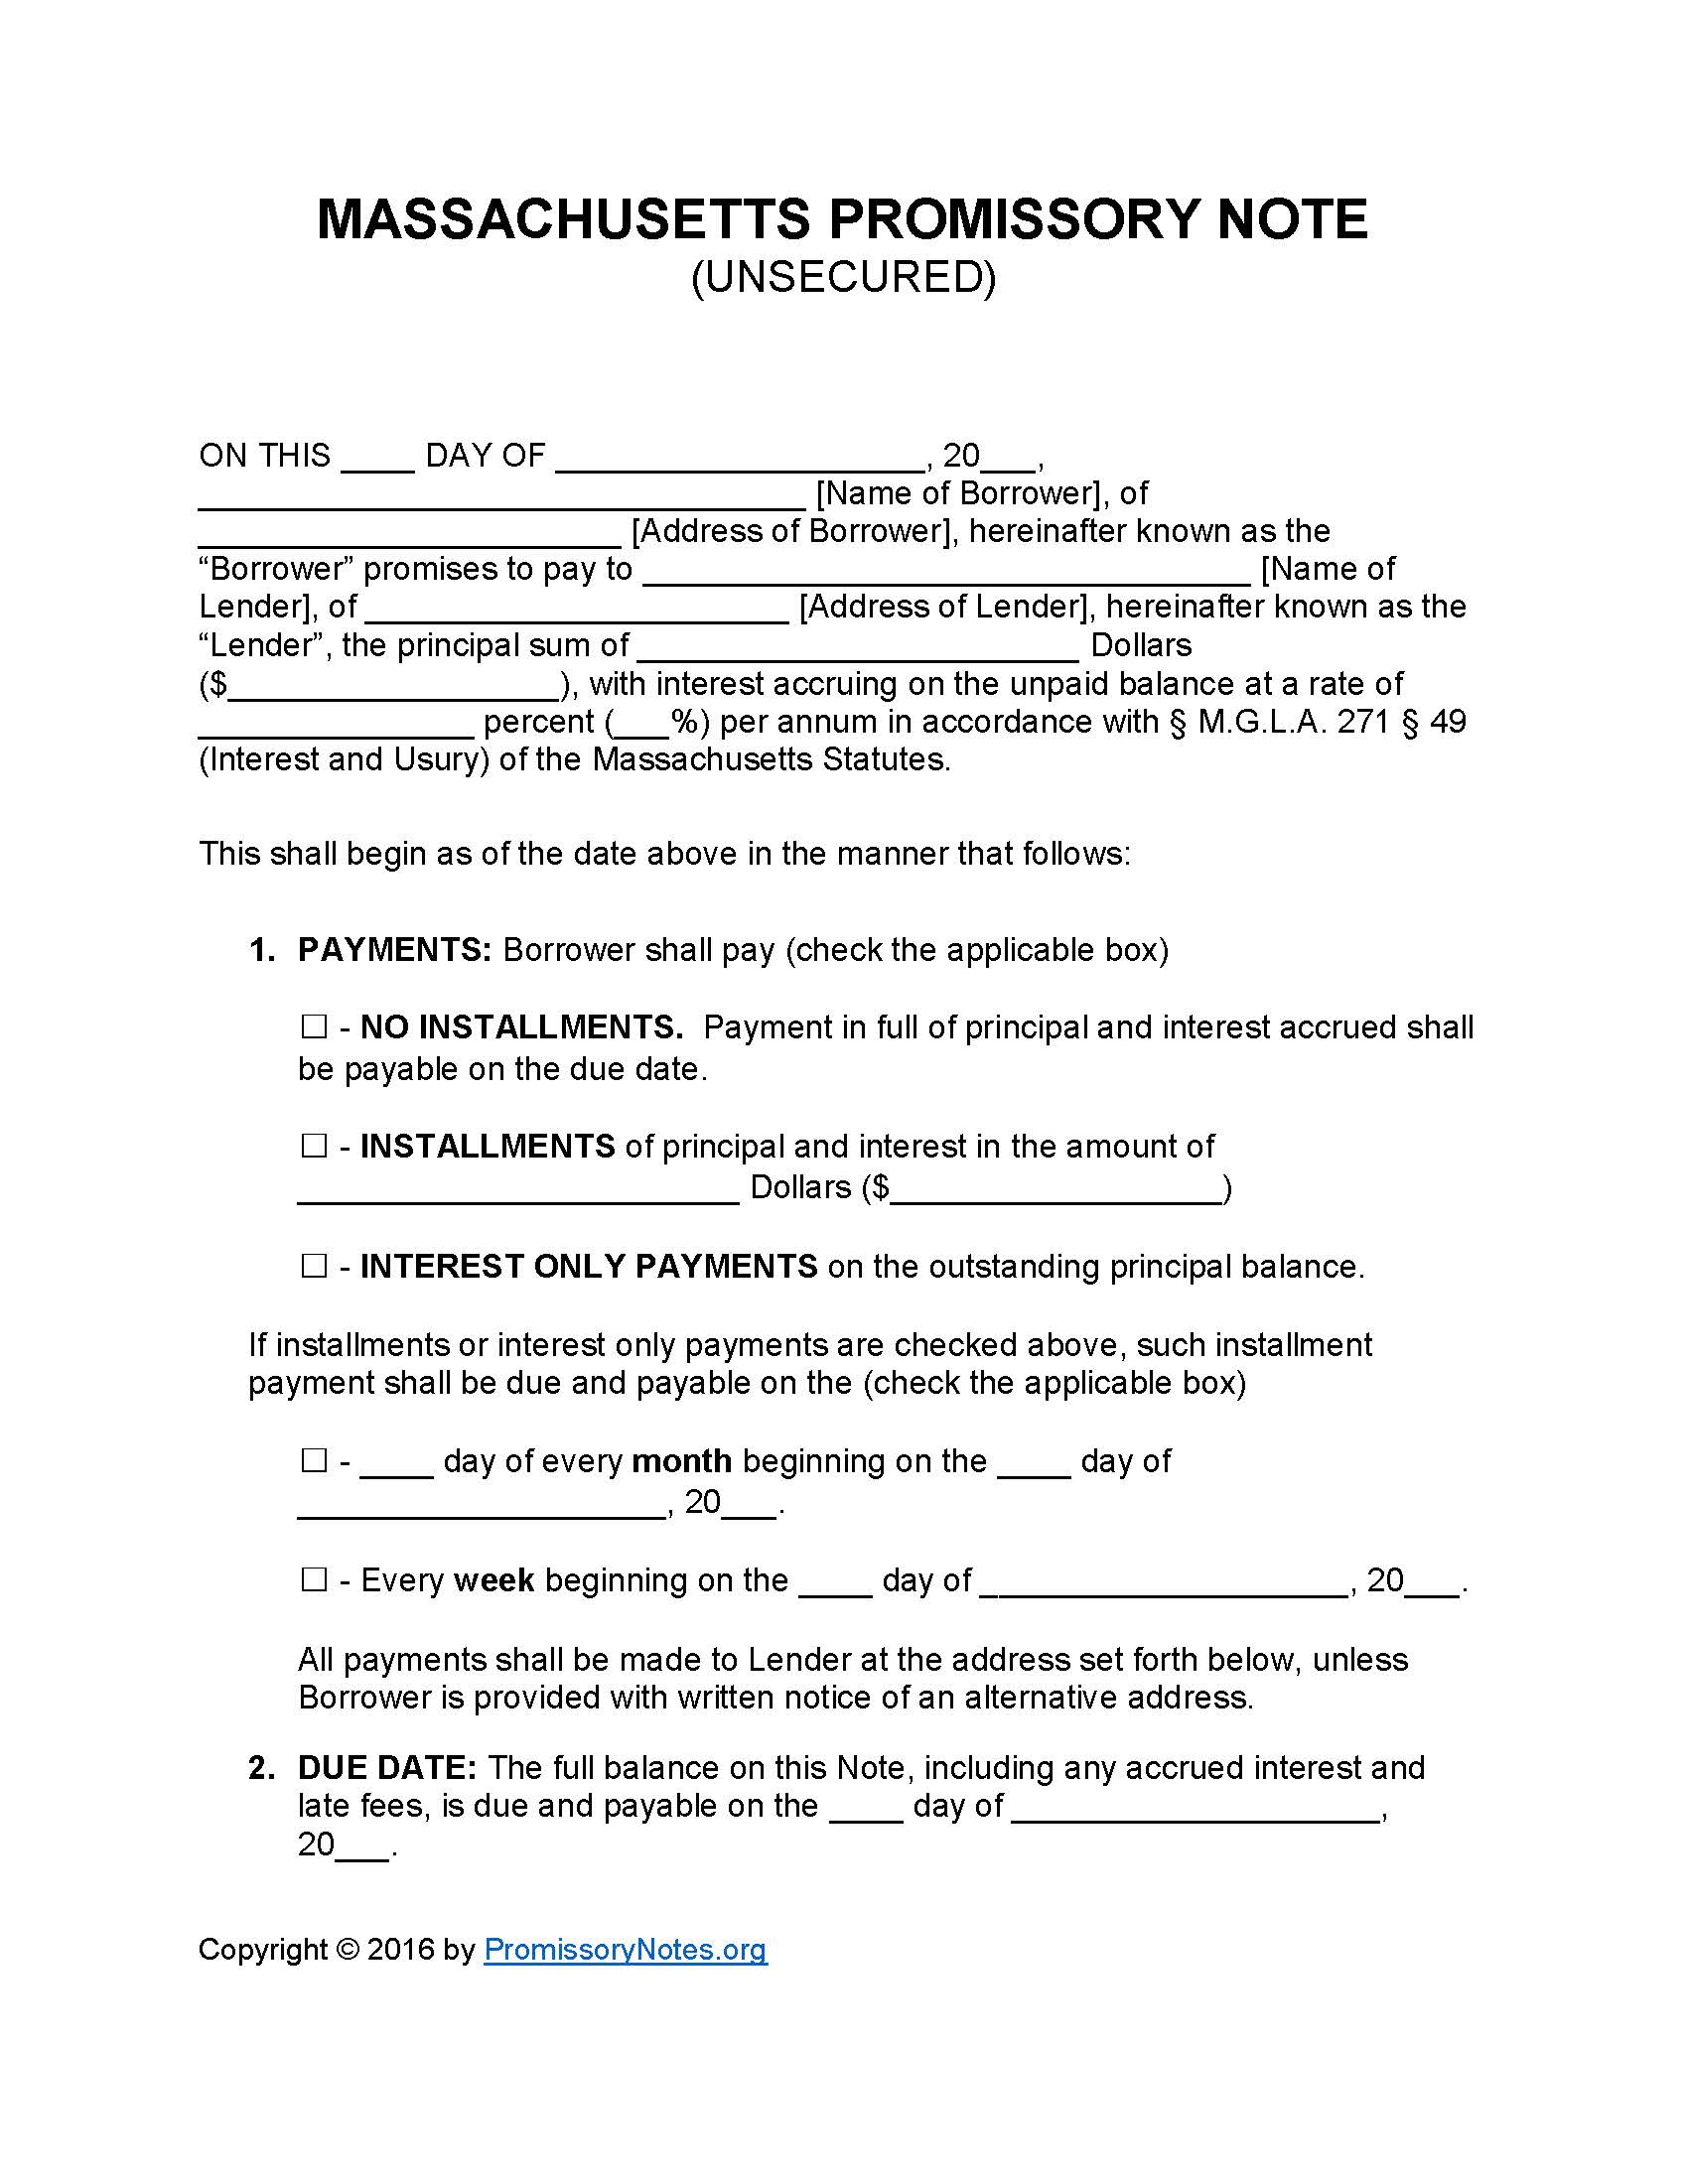 Massachusetts Unsecured Promissory Note Template - Promissory With Unsecured Note Template